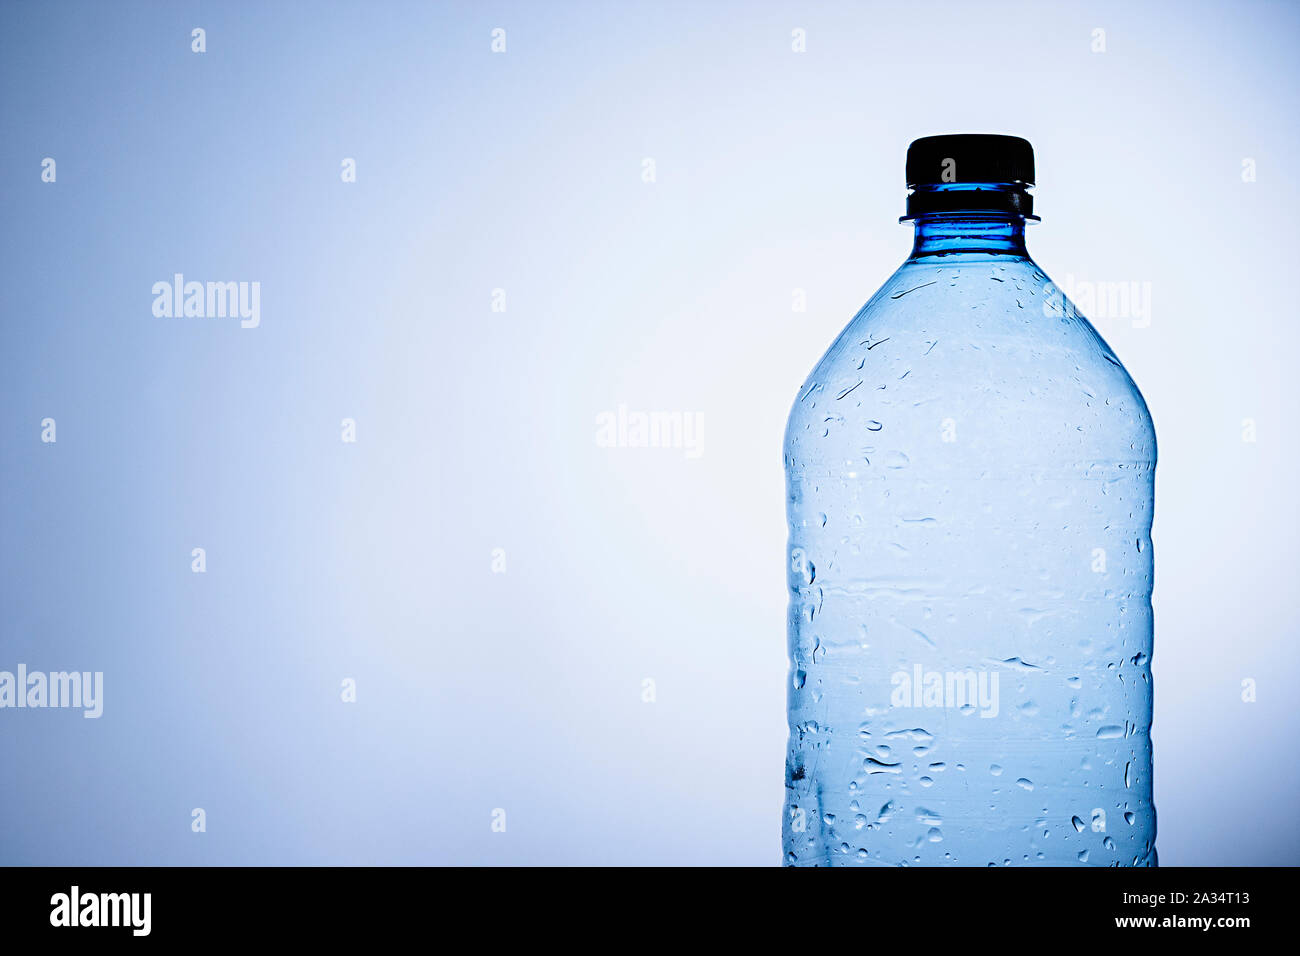 Clear plastic bottle of chilled water or liquid with condensation droplets on the surface of the bottle over blue with copy space Stock Photo